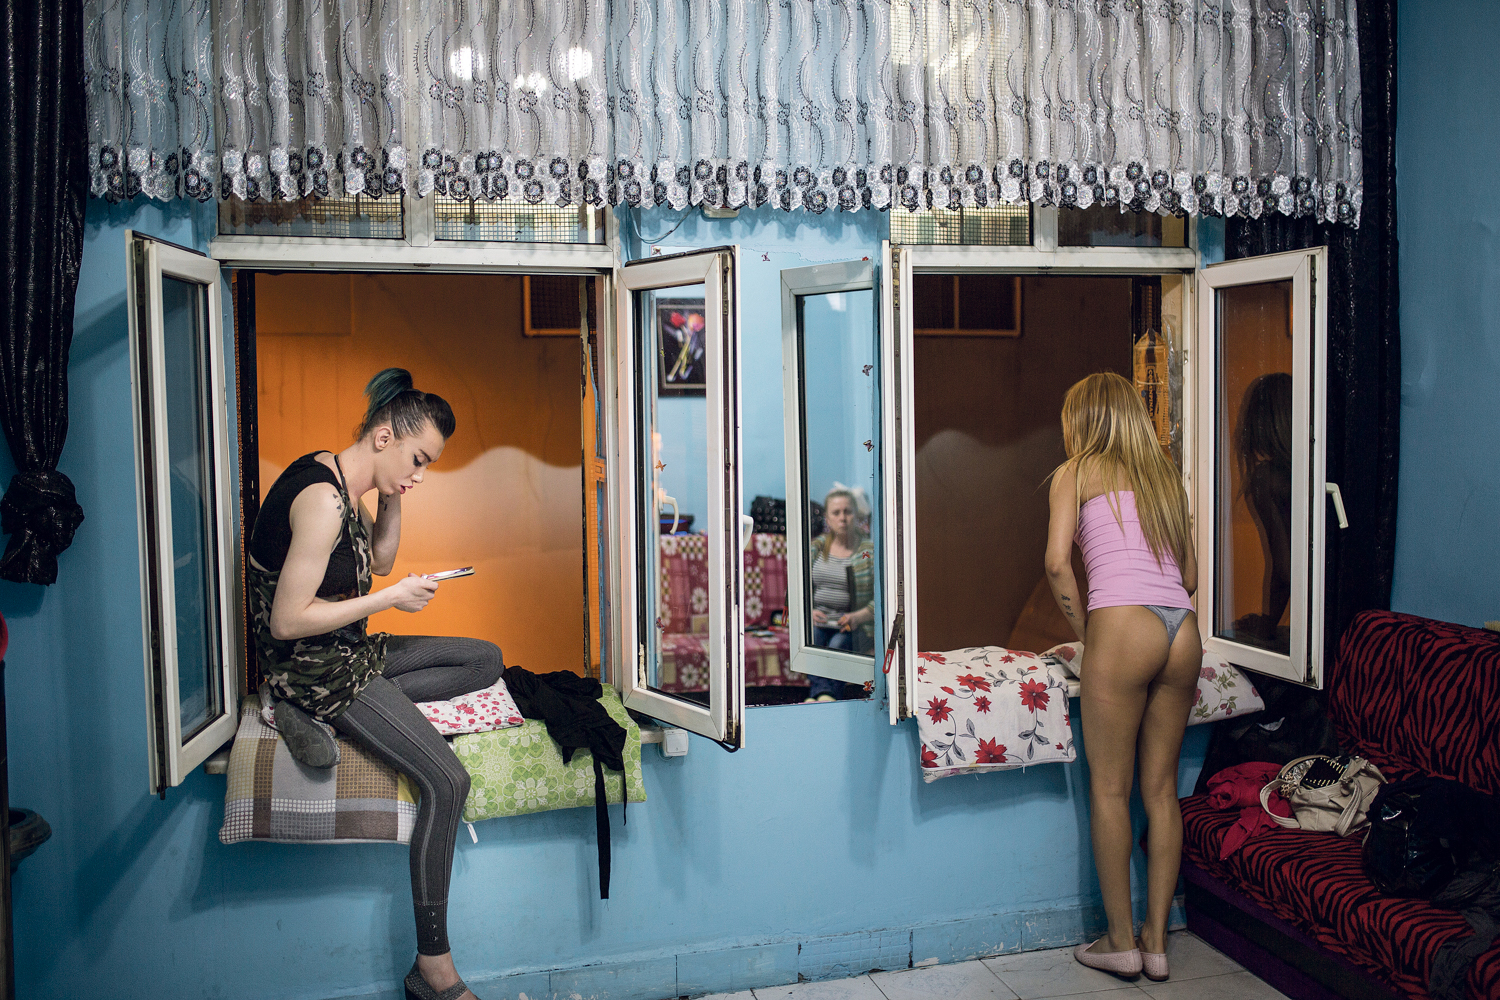 Istanbul bordell in Window prostitution